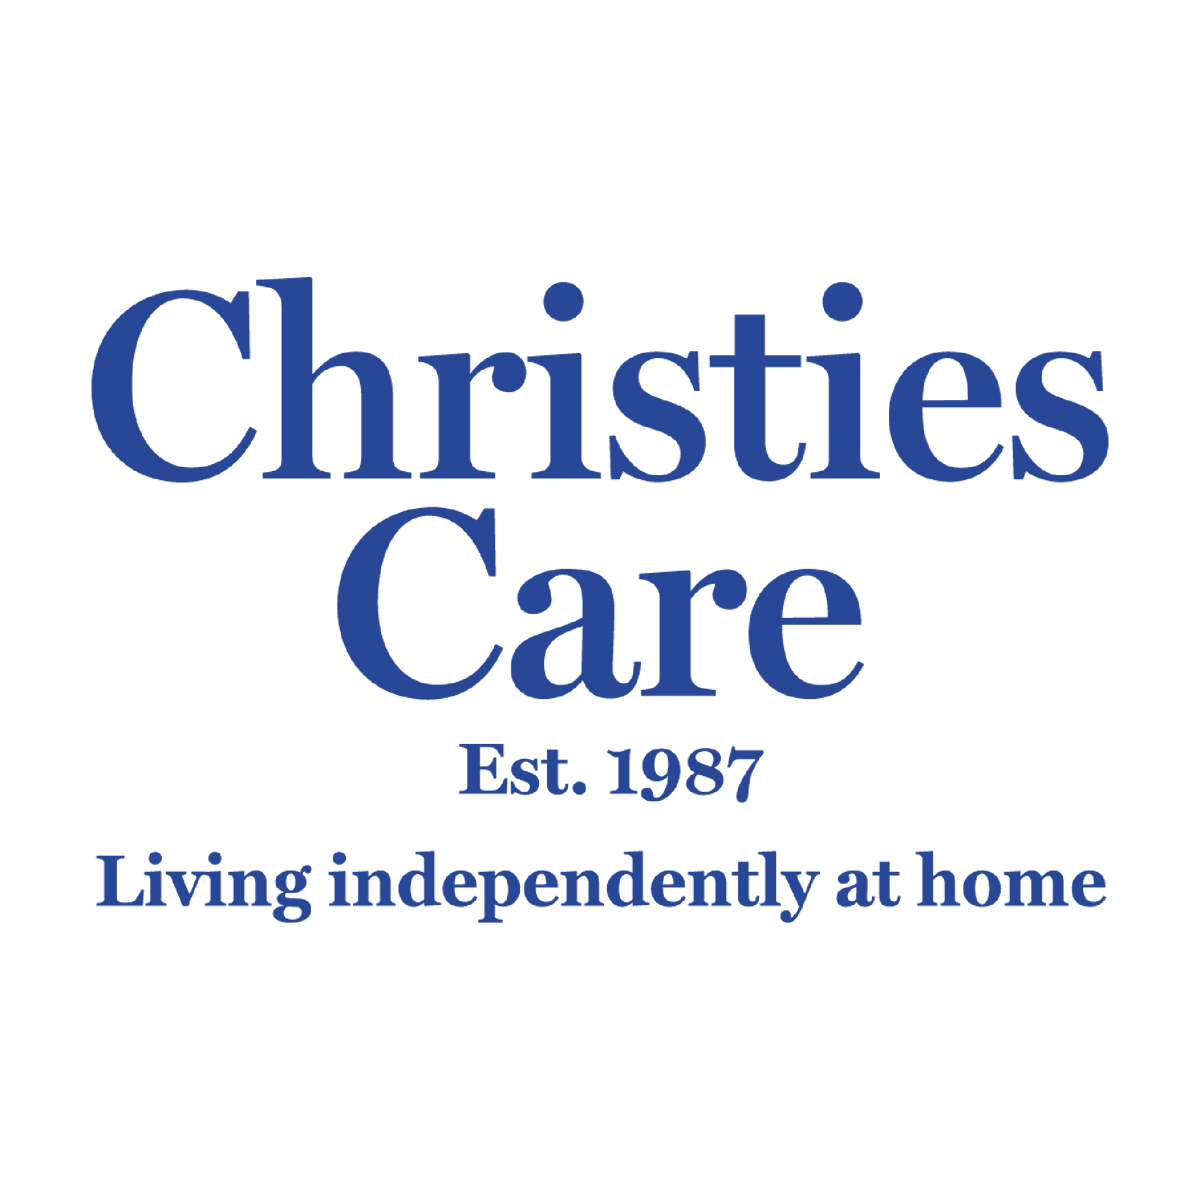 We are delighted to be welcoming a new member to the JCF! Christies Care has been a family owned and run care agency since 1991. You can learn more about them at our JCF Members Directory - loom.ly/fUl7_qw